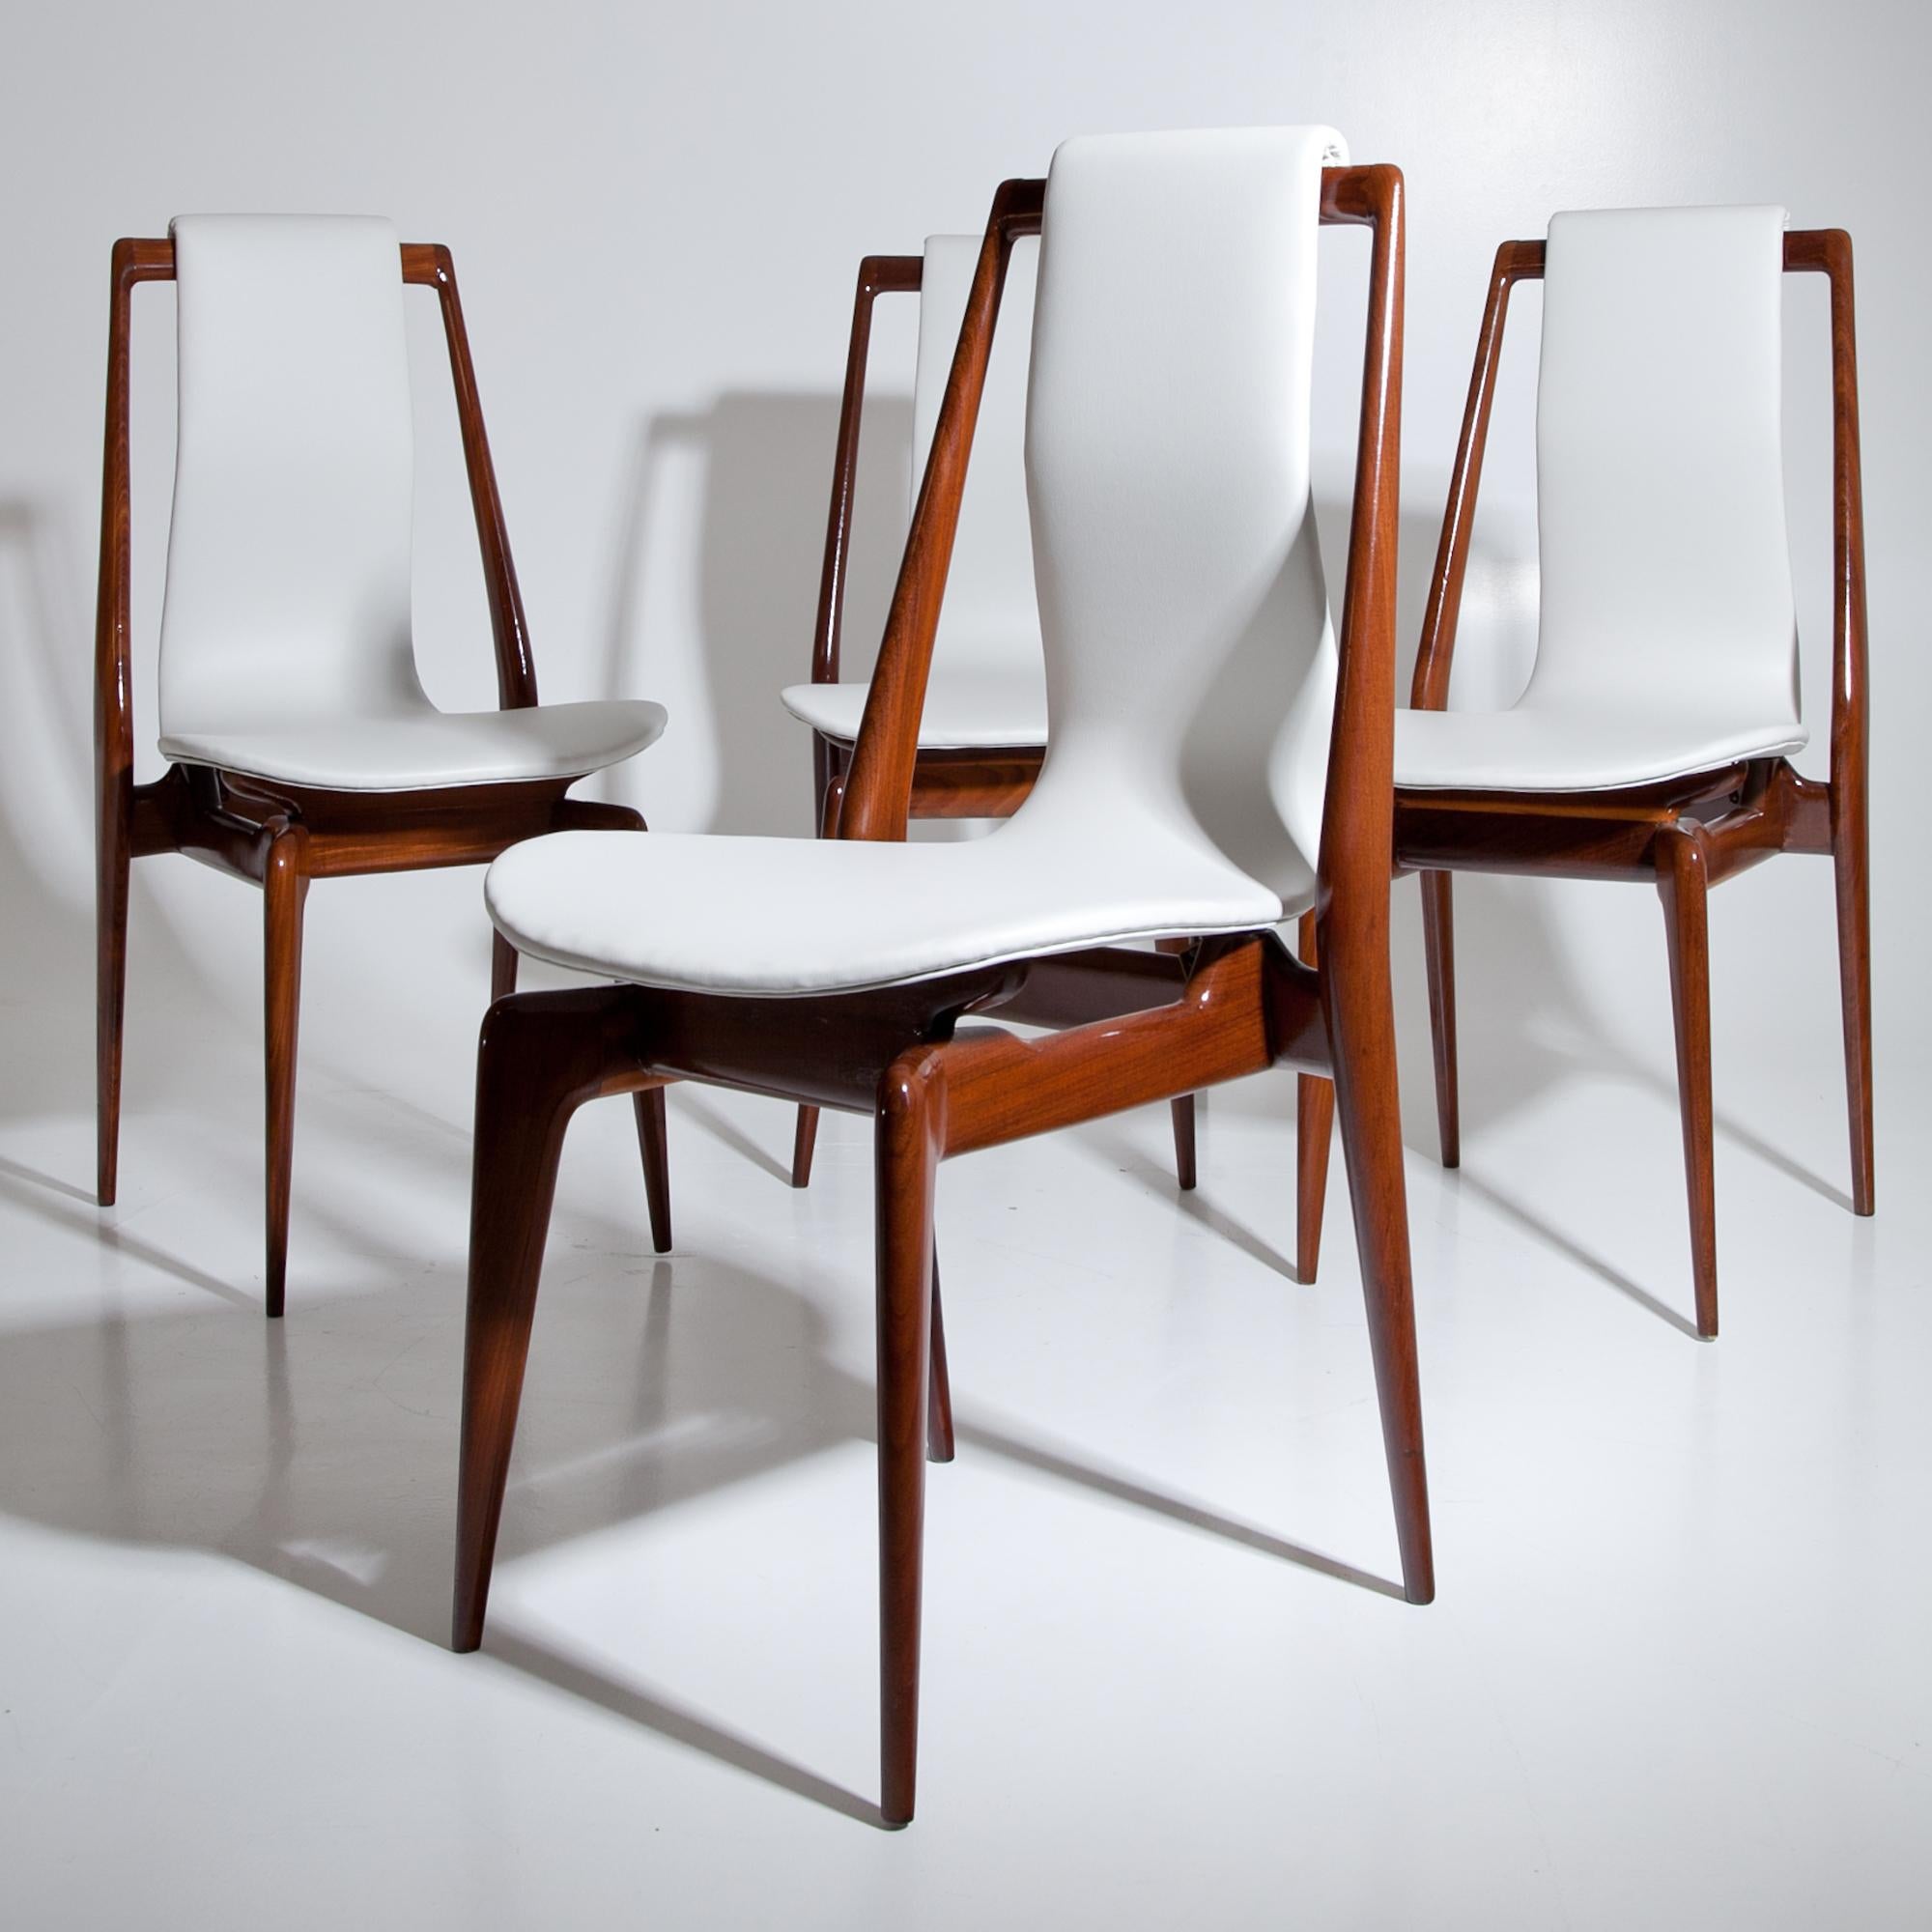 Mid-Century Modern Midcentury Chairs Attributed to Dassi, Italy 1950s